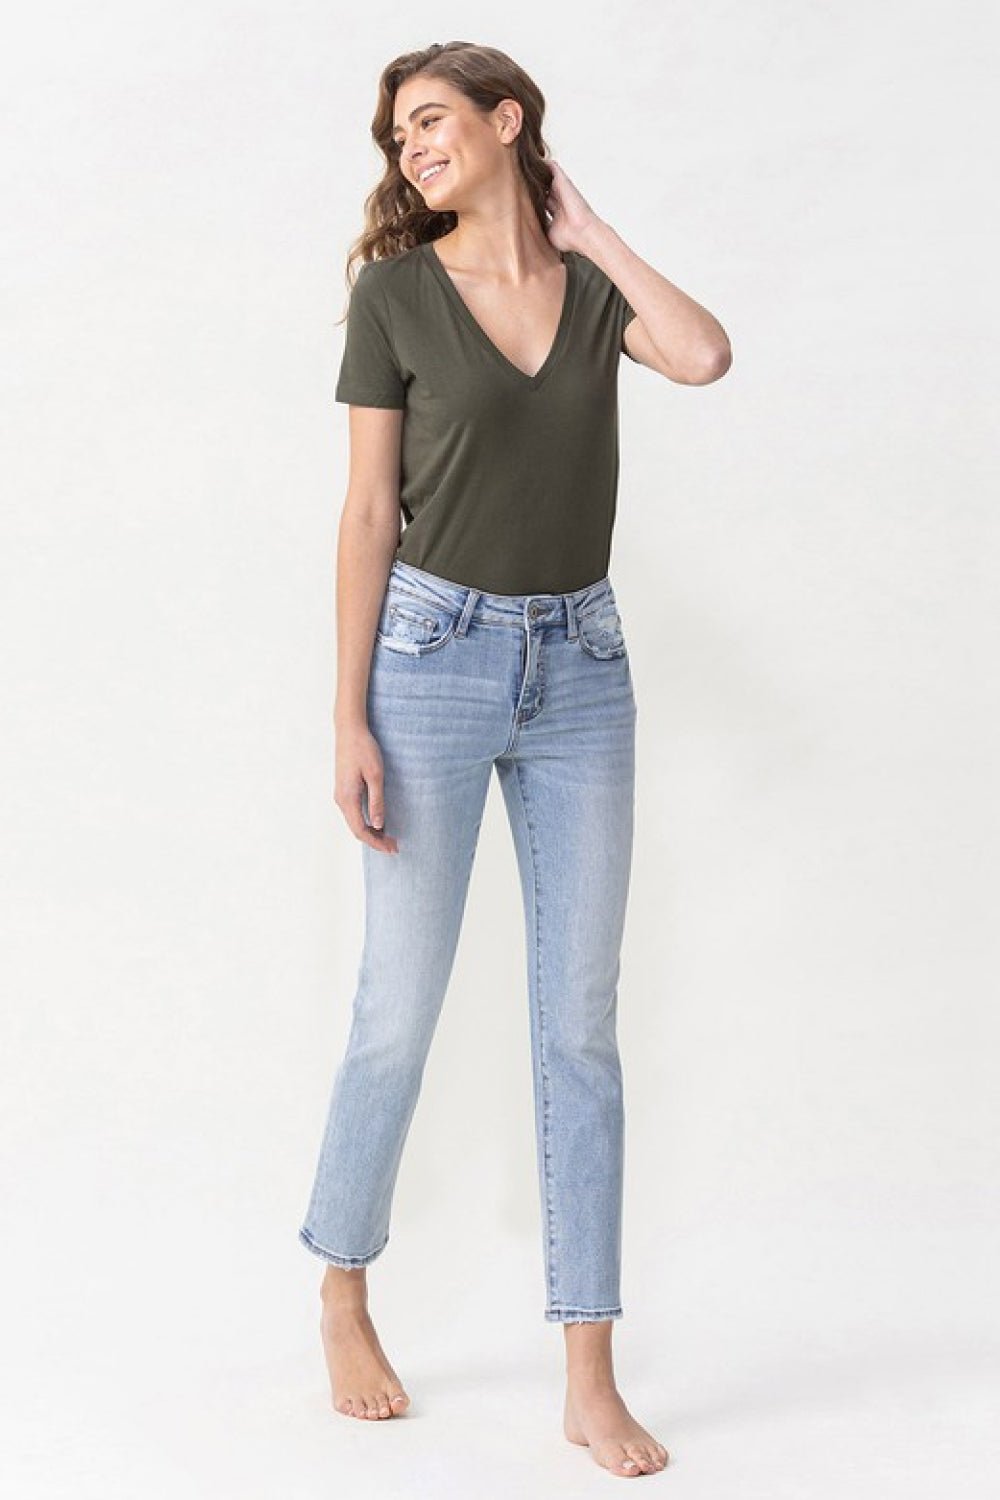 Enchant Your Heart - Indulge in the Beauty of LOVERVET's Full Size Andrea Midrise Crop Straight Jeans and Let Your Unique Charm Shine Through. - Guy Christopher